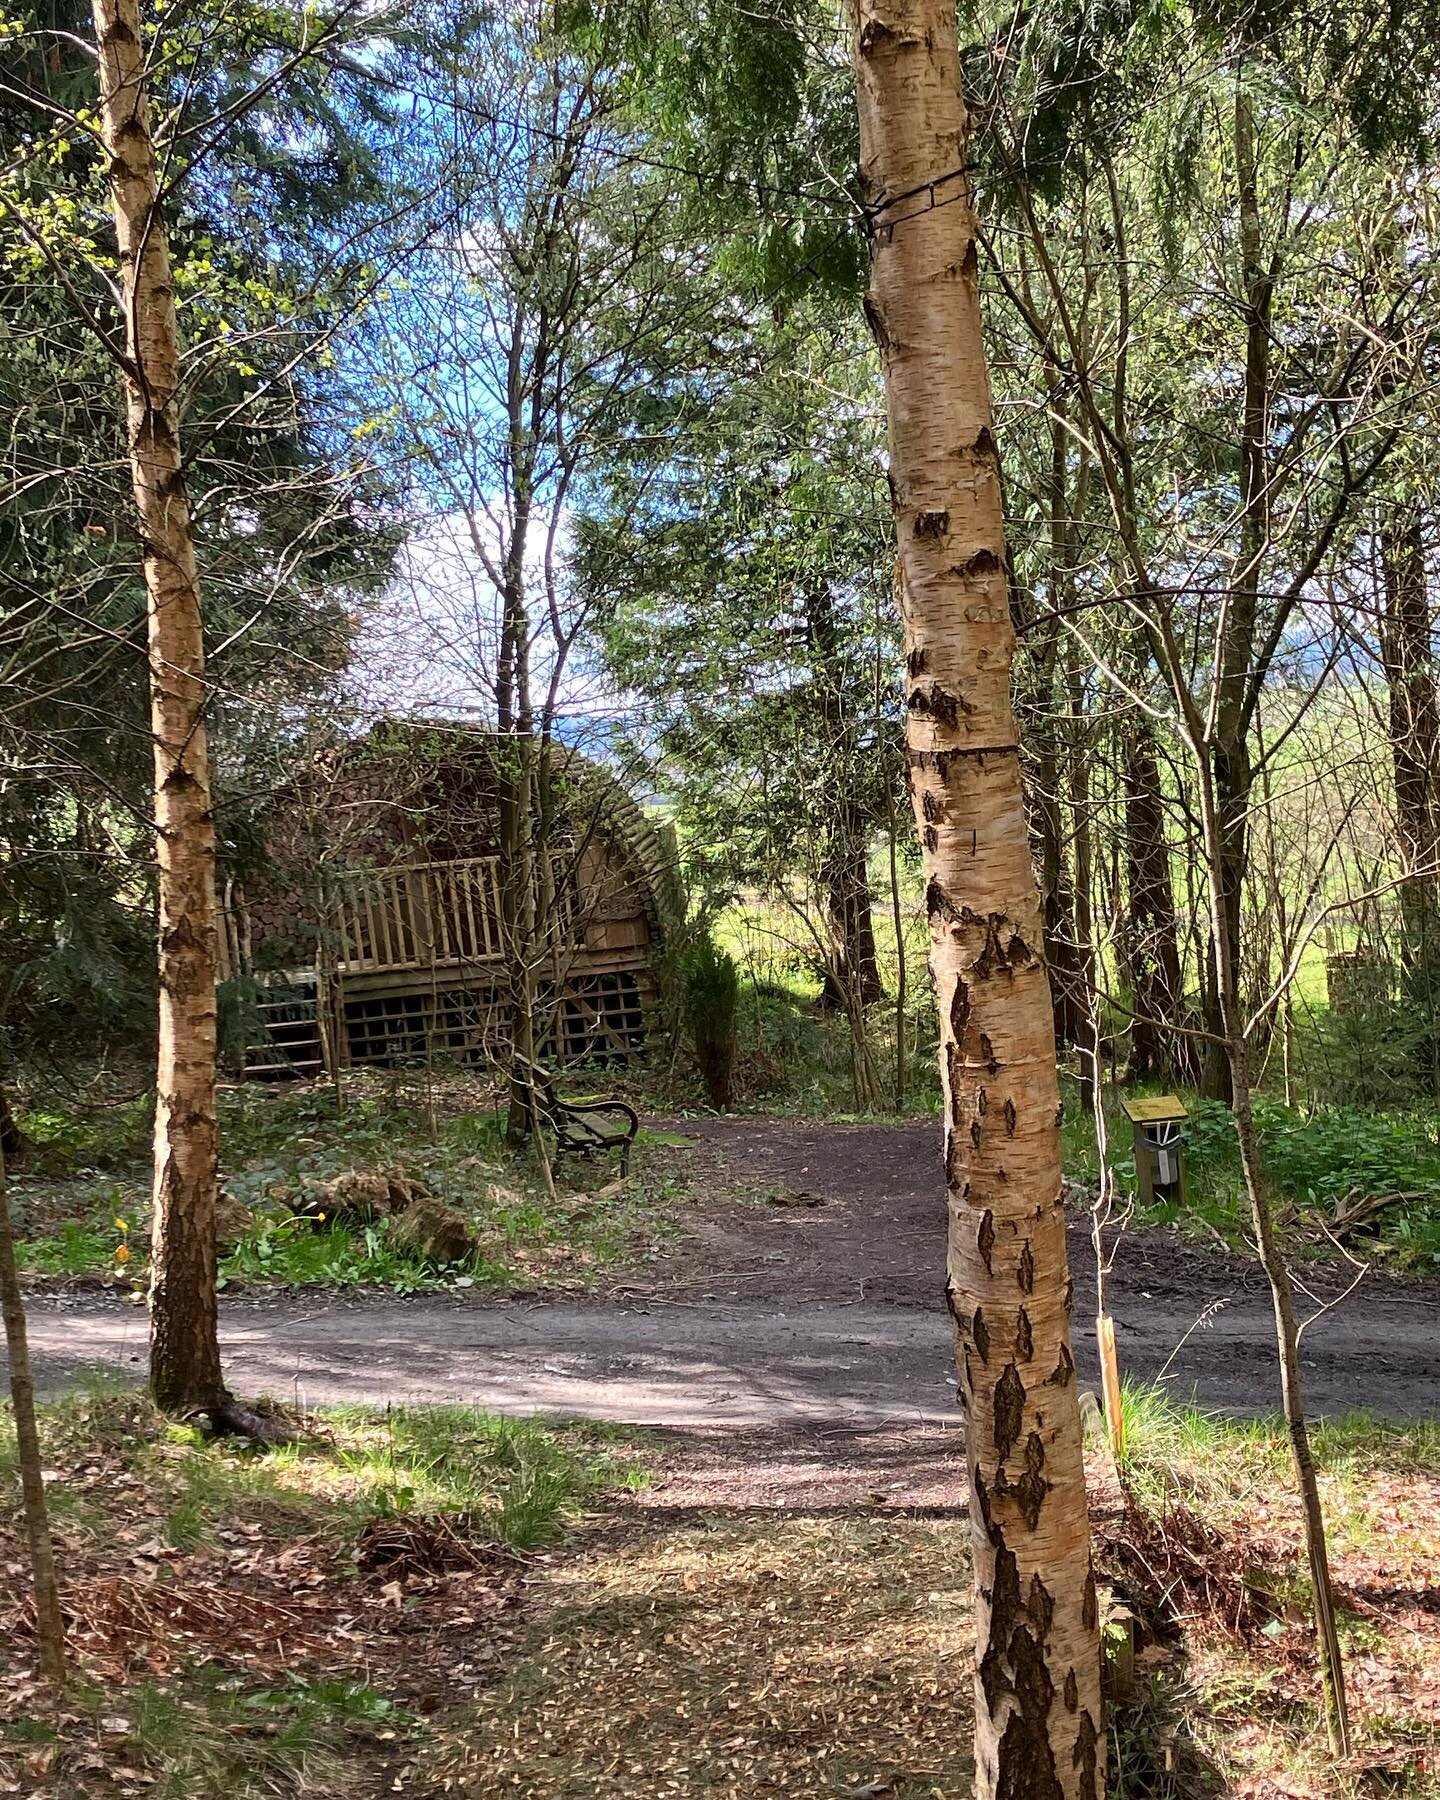 That&rsquo;s us all ready for todays weekend arrivals. We hope you all have a great bank holiday whatever you get up to.
#bankholiday #bankholidayweekend #glamping #glampinglife #glampinginthewoods #glampingpod #cabin #cabininthewoods #weekendinwales